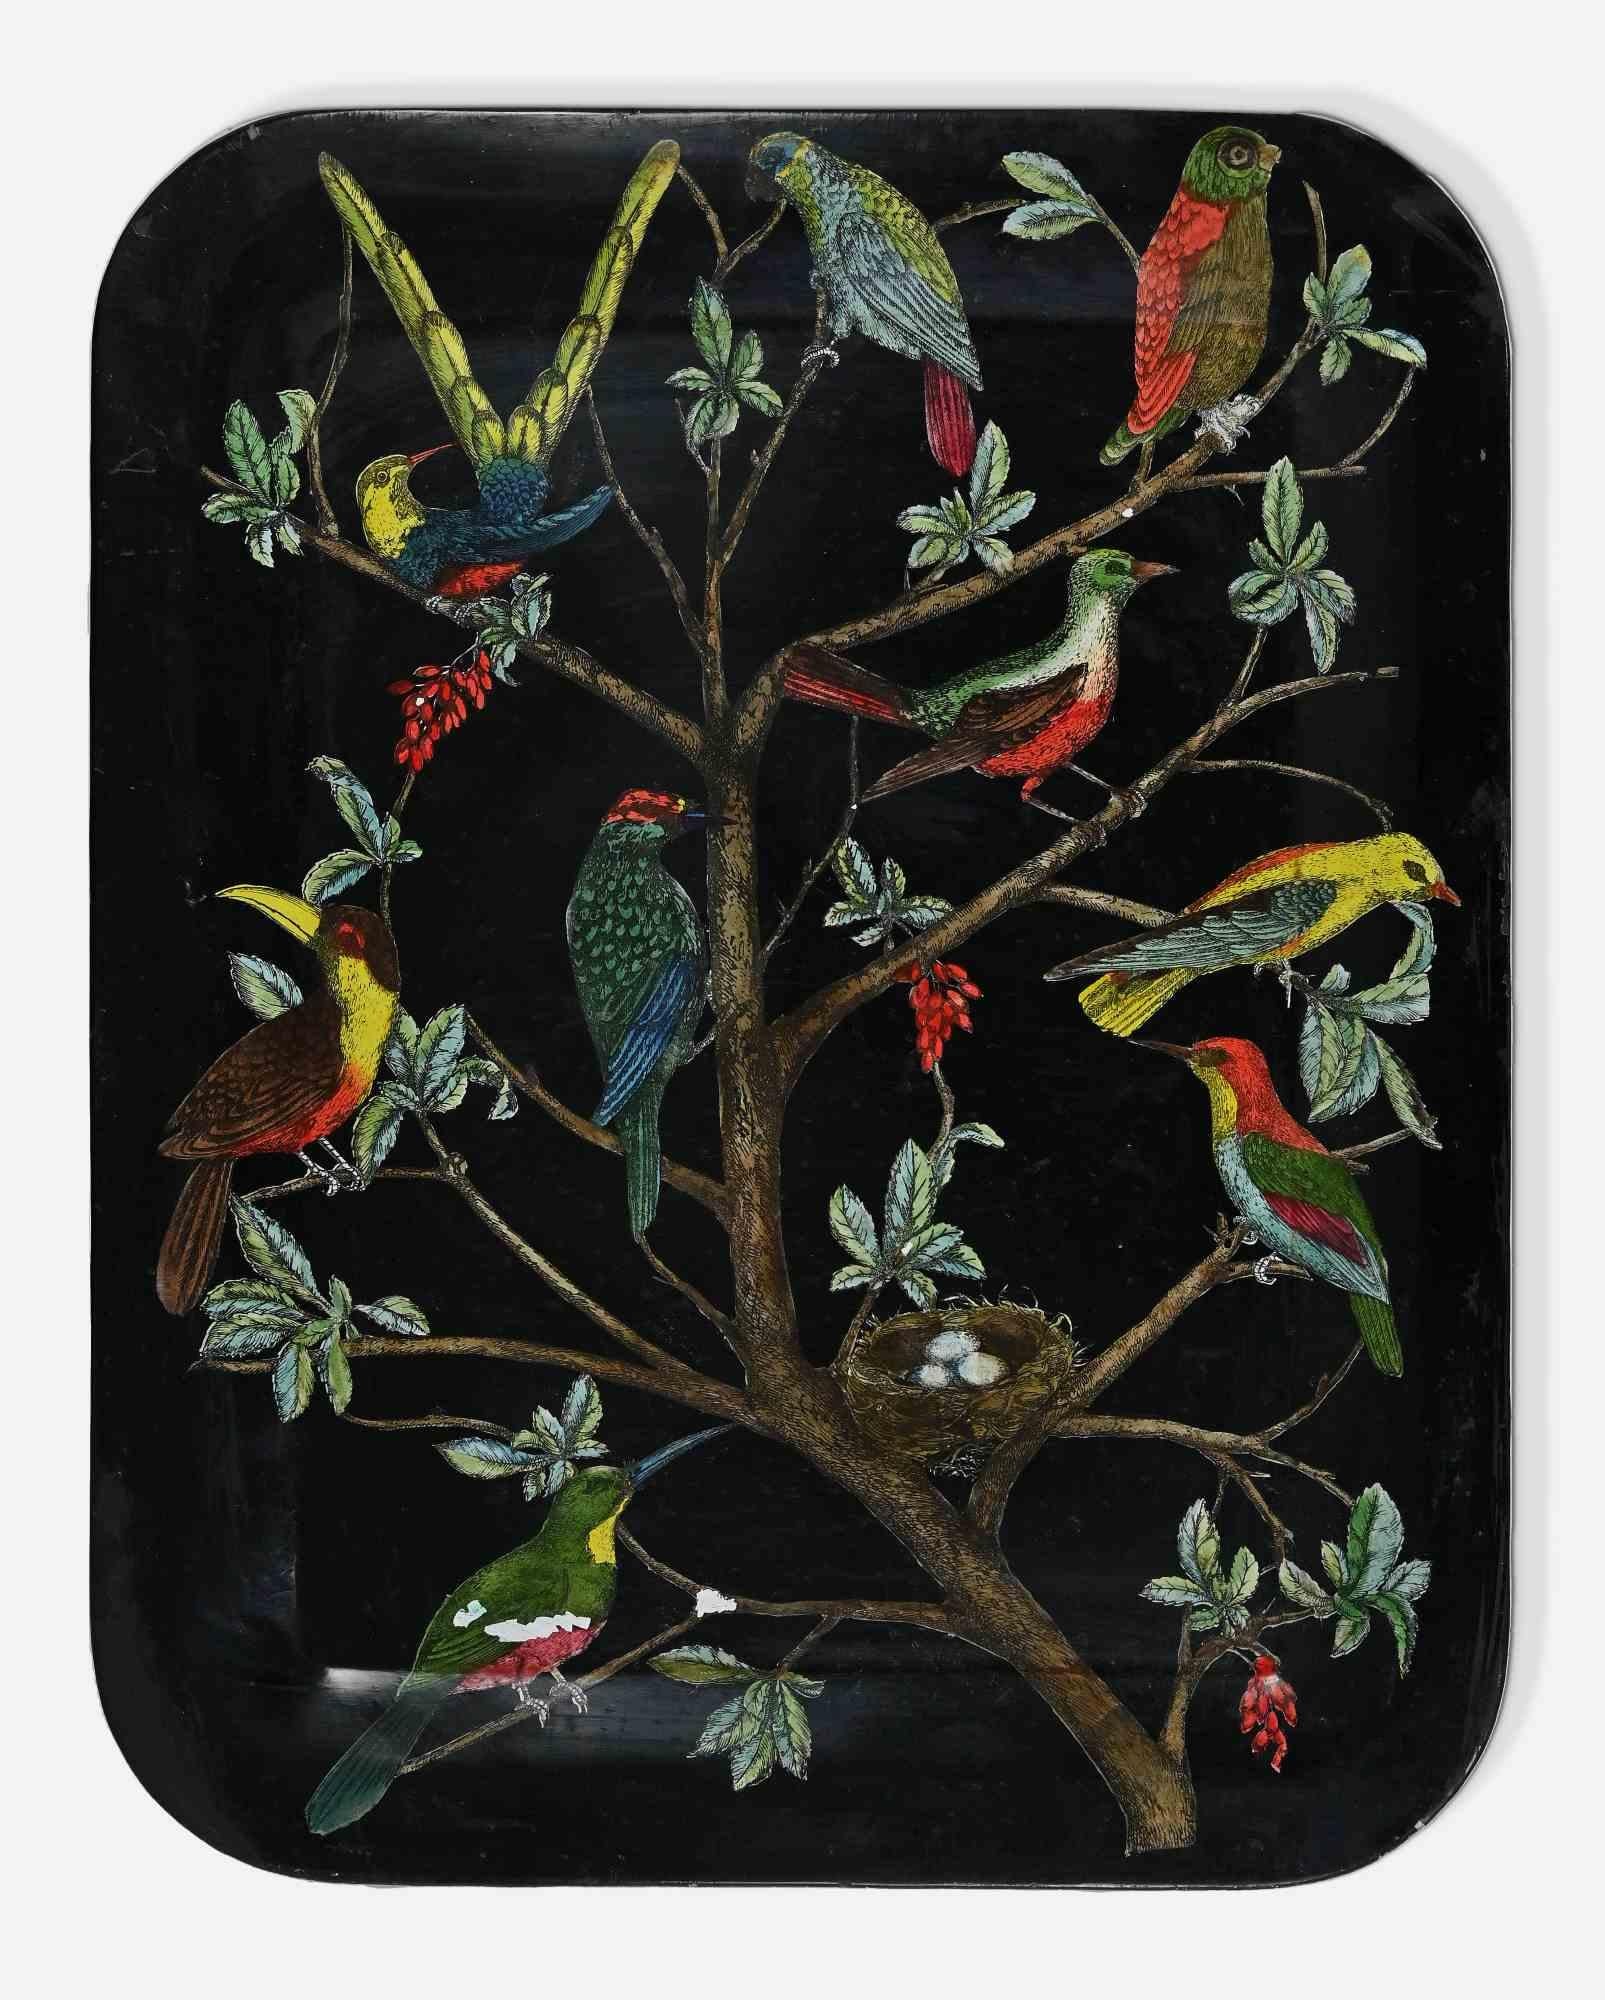 Serving Tray with Birds is a vintage decorative object realized by Piero Fornasetti in 1950s.

Metal varnished and decorated with Silkscreen.

Some scratches and loss of colors on the surface.

Top rare tray realized by Piero Fornasetti in 1950s.